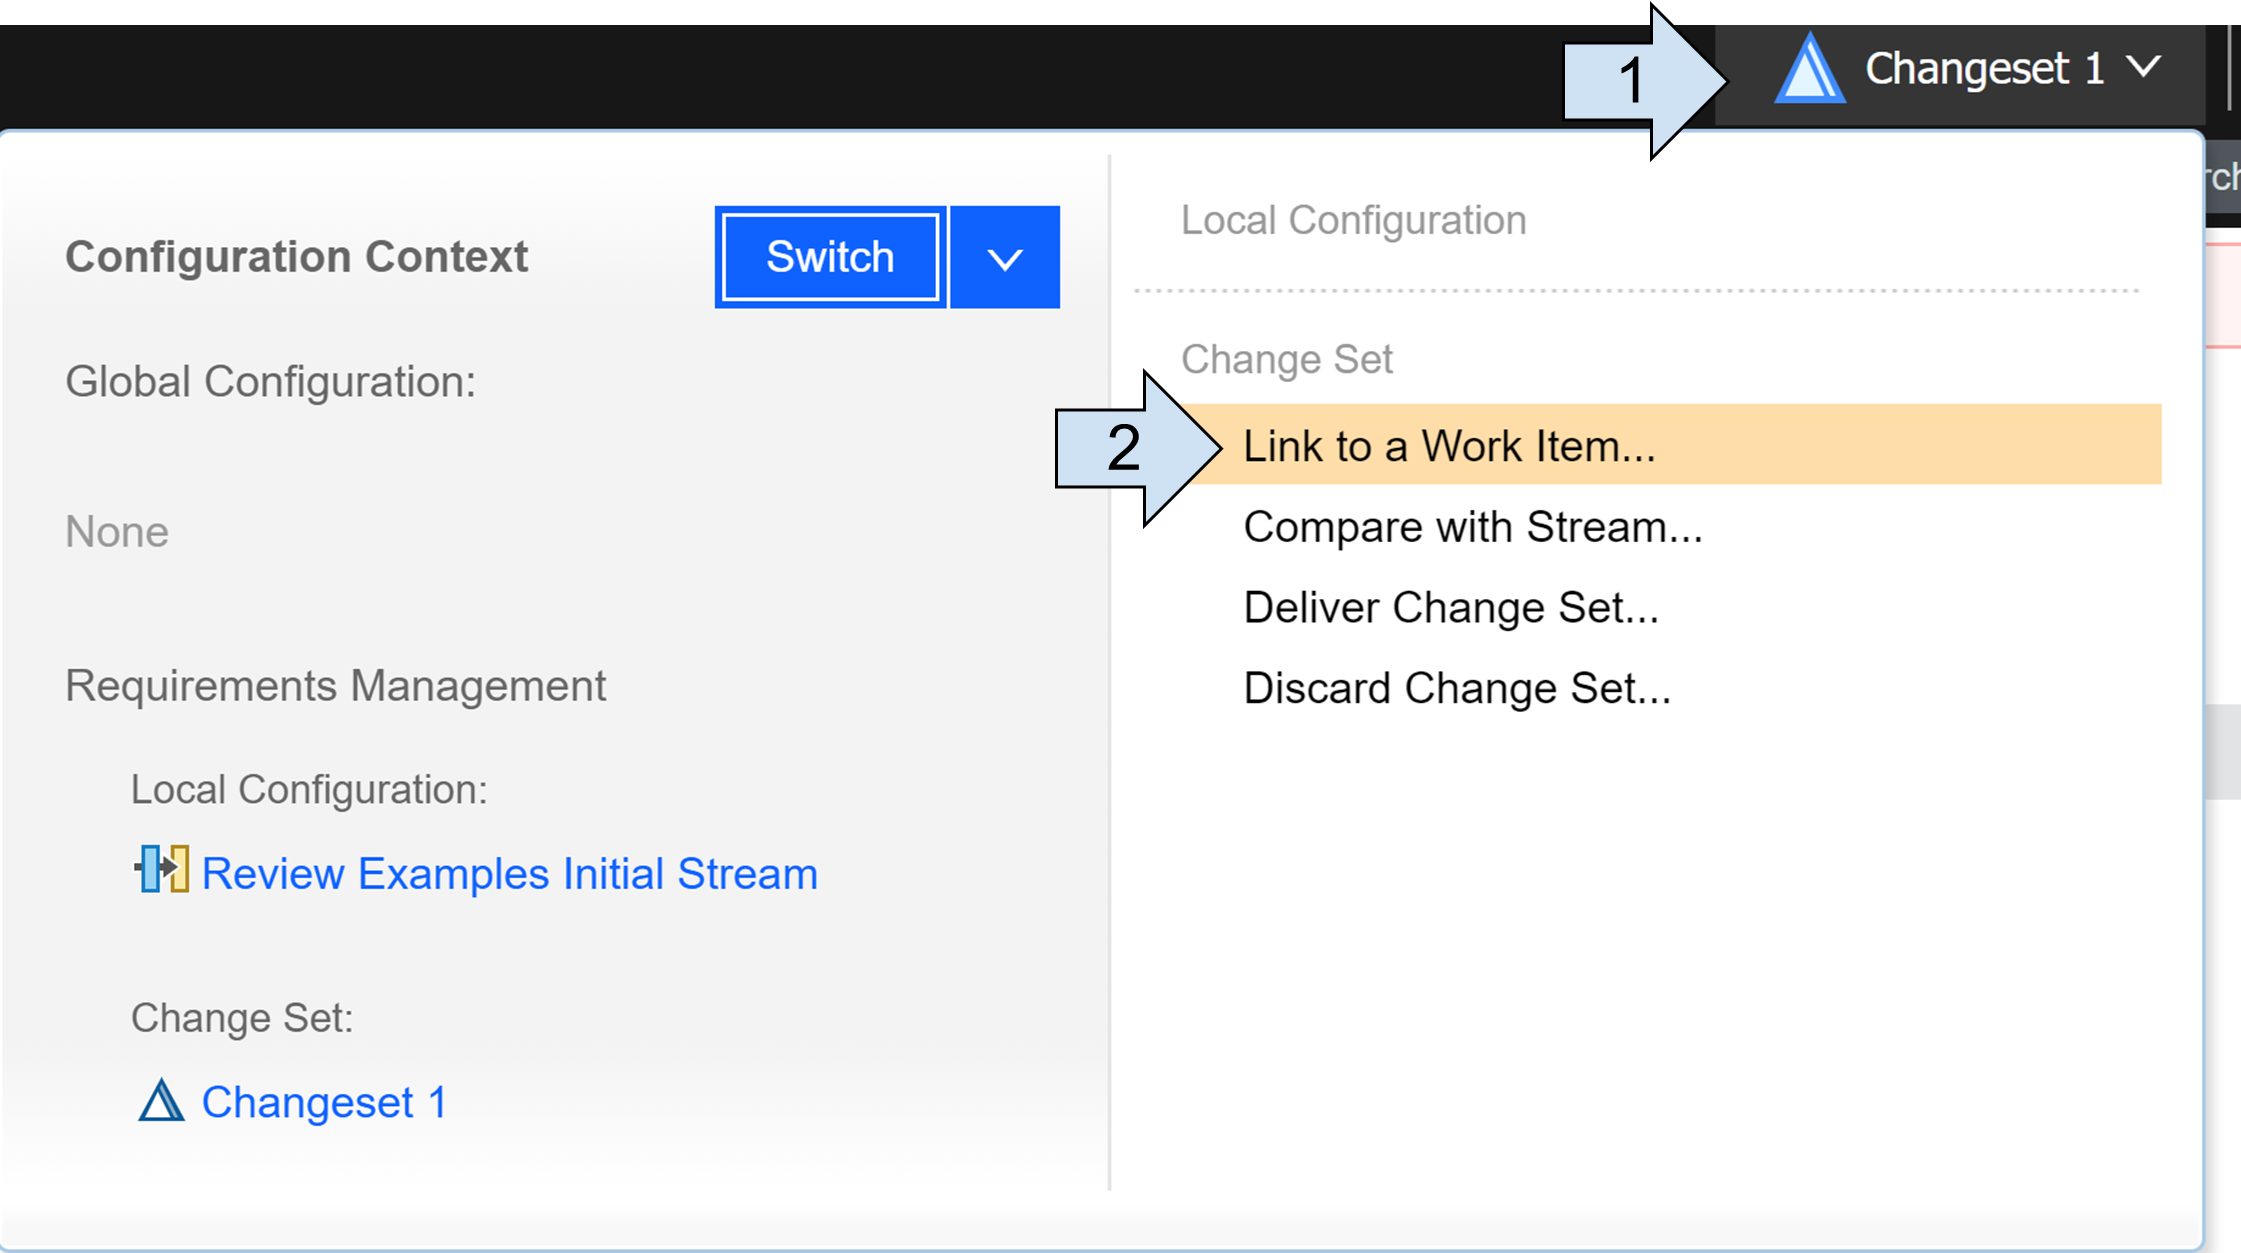 Now under change set category there are options to Link to work item, Compare with stream, Deliver Change set, Discard Change Set